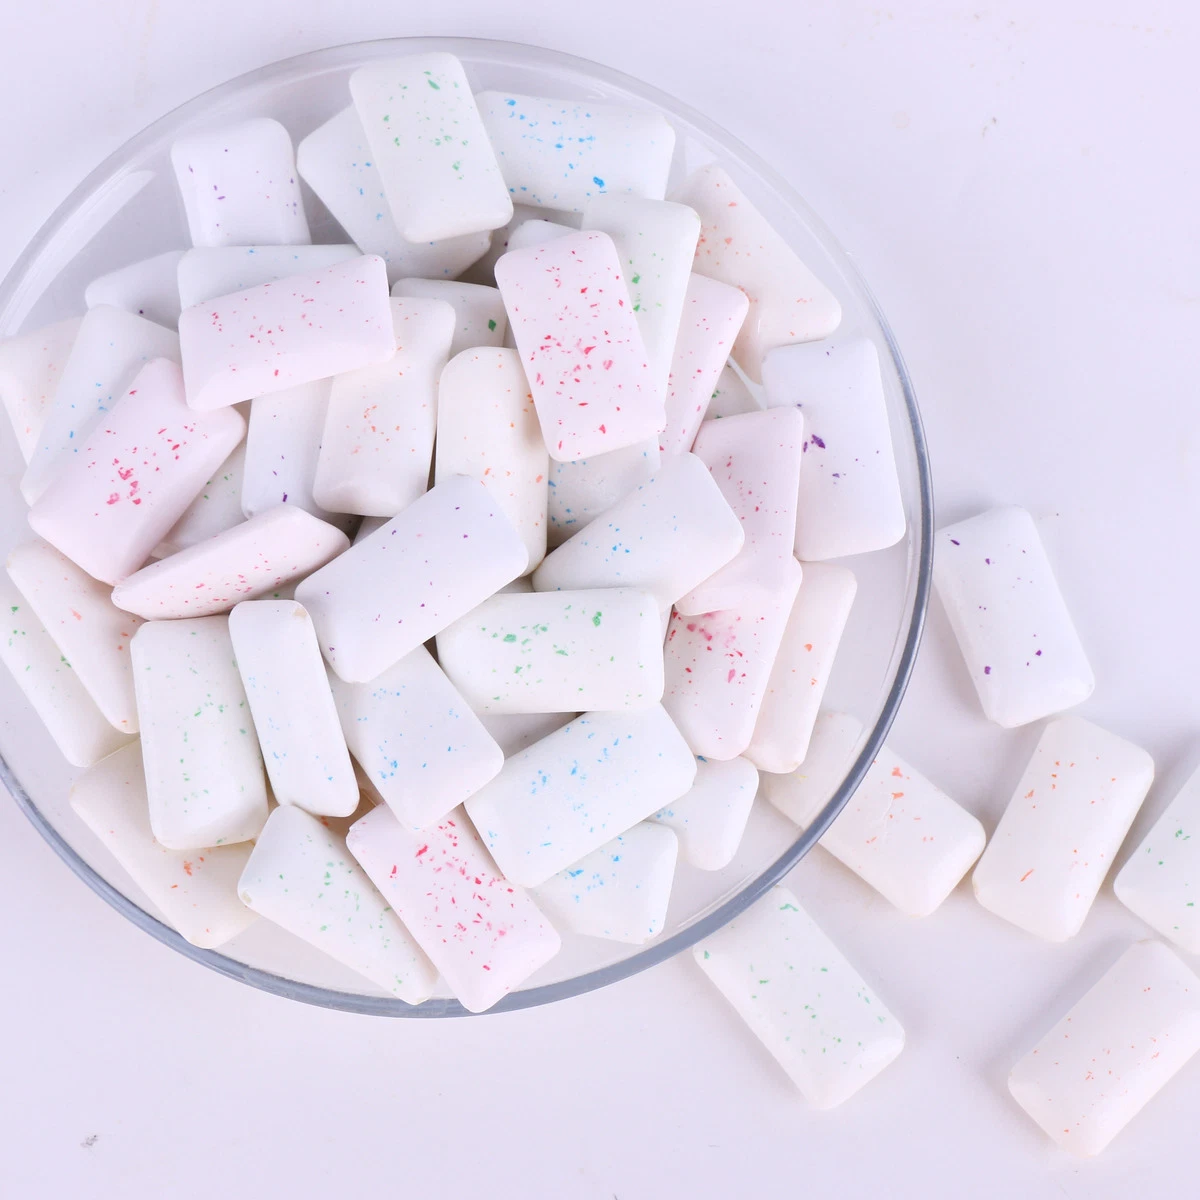 High quality/High cost performance Different Flavors Fruit Bubble Chewing Gum Sweet